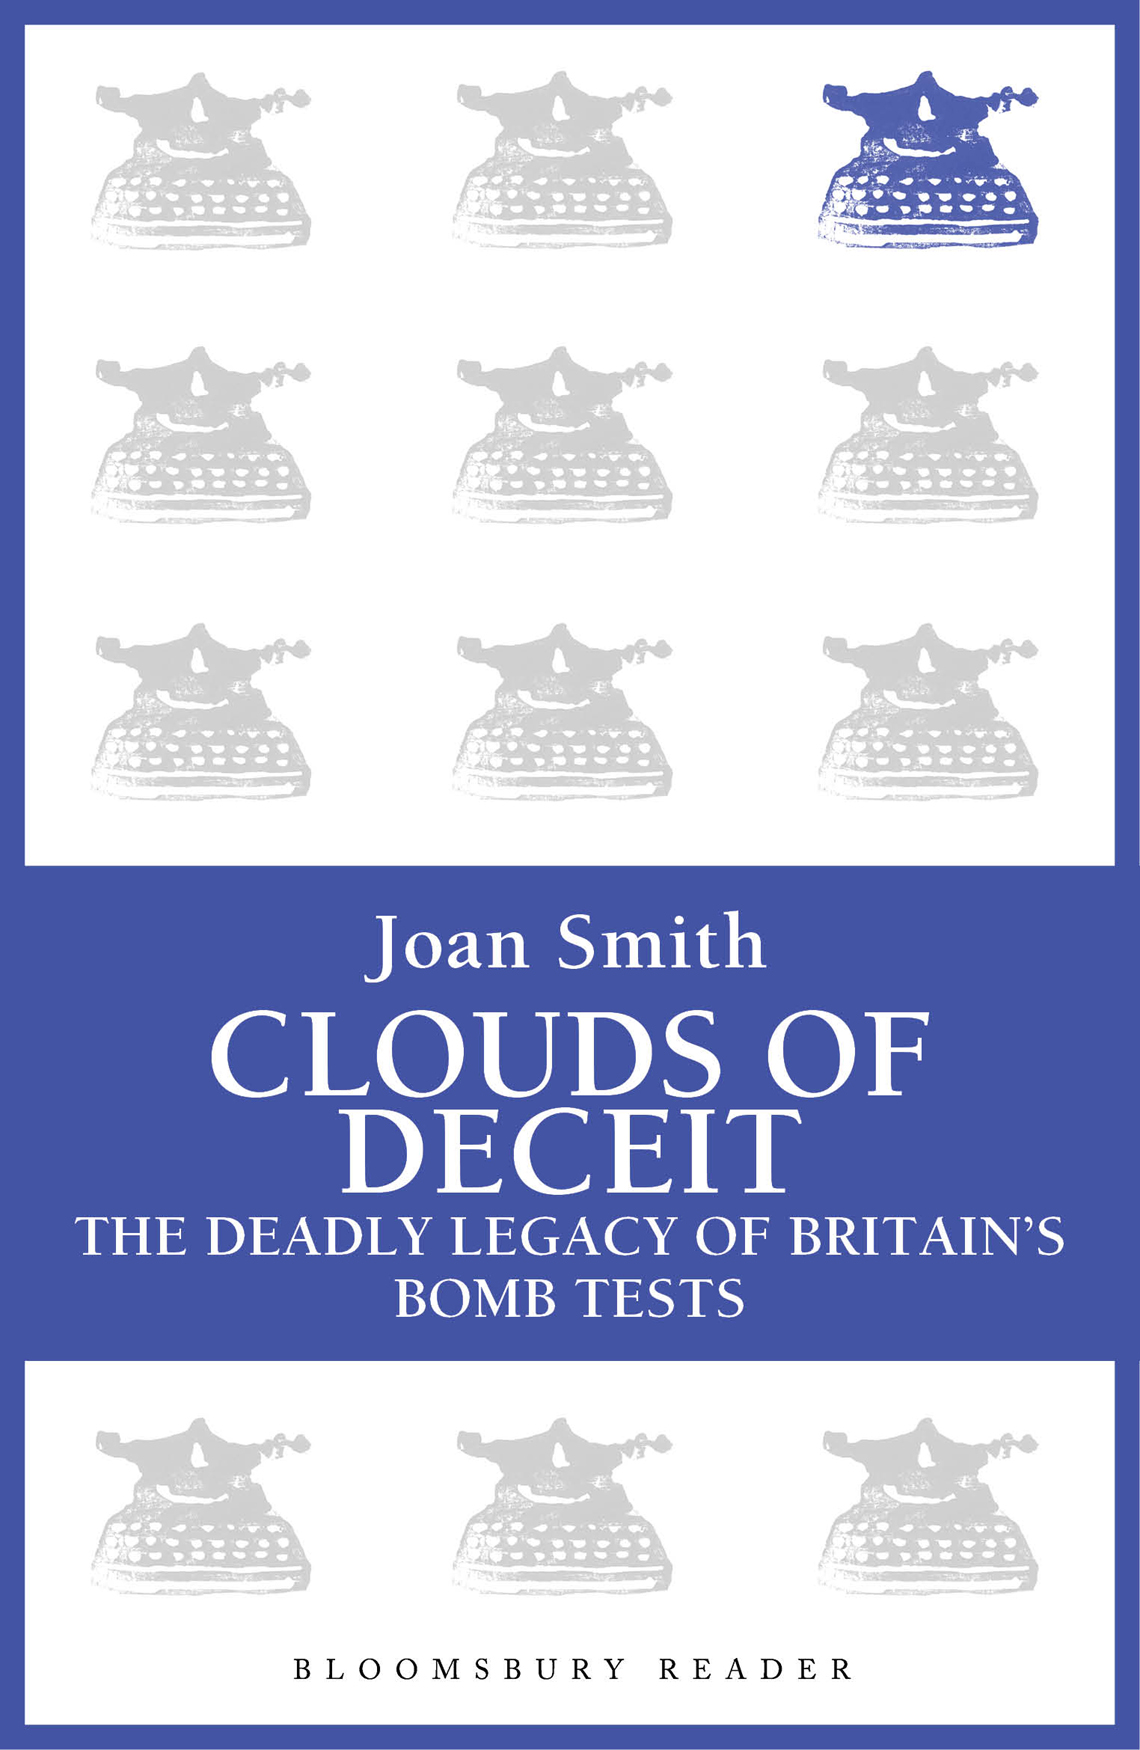 Clouds of Deceit (1985) by Joan Smith